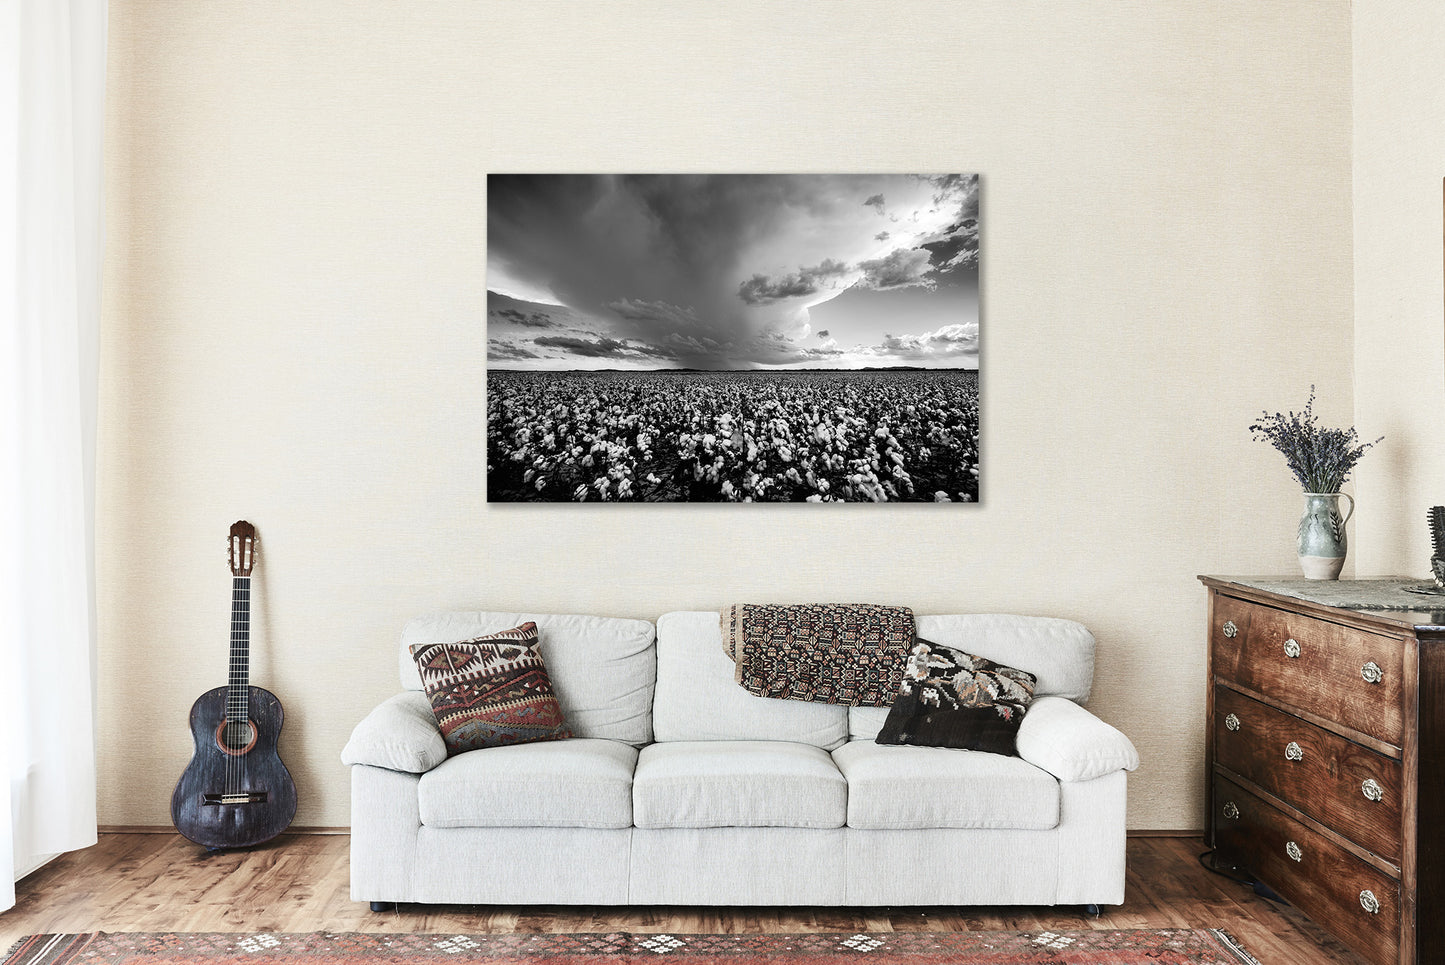 Farm Metal Print - Picture of Storm Cloud Over Cotton Field in Oklahoma - Black and White Country Farmhouse Wall Art Photo Decor